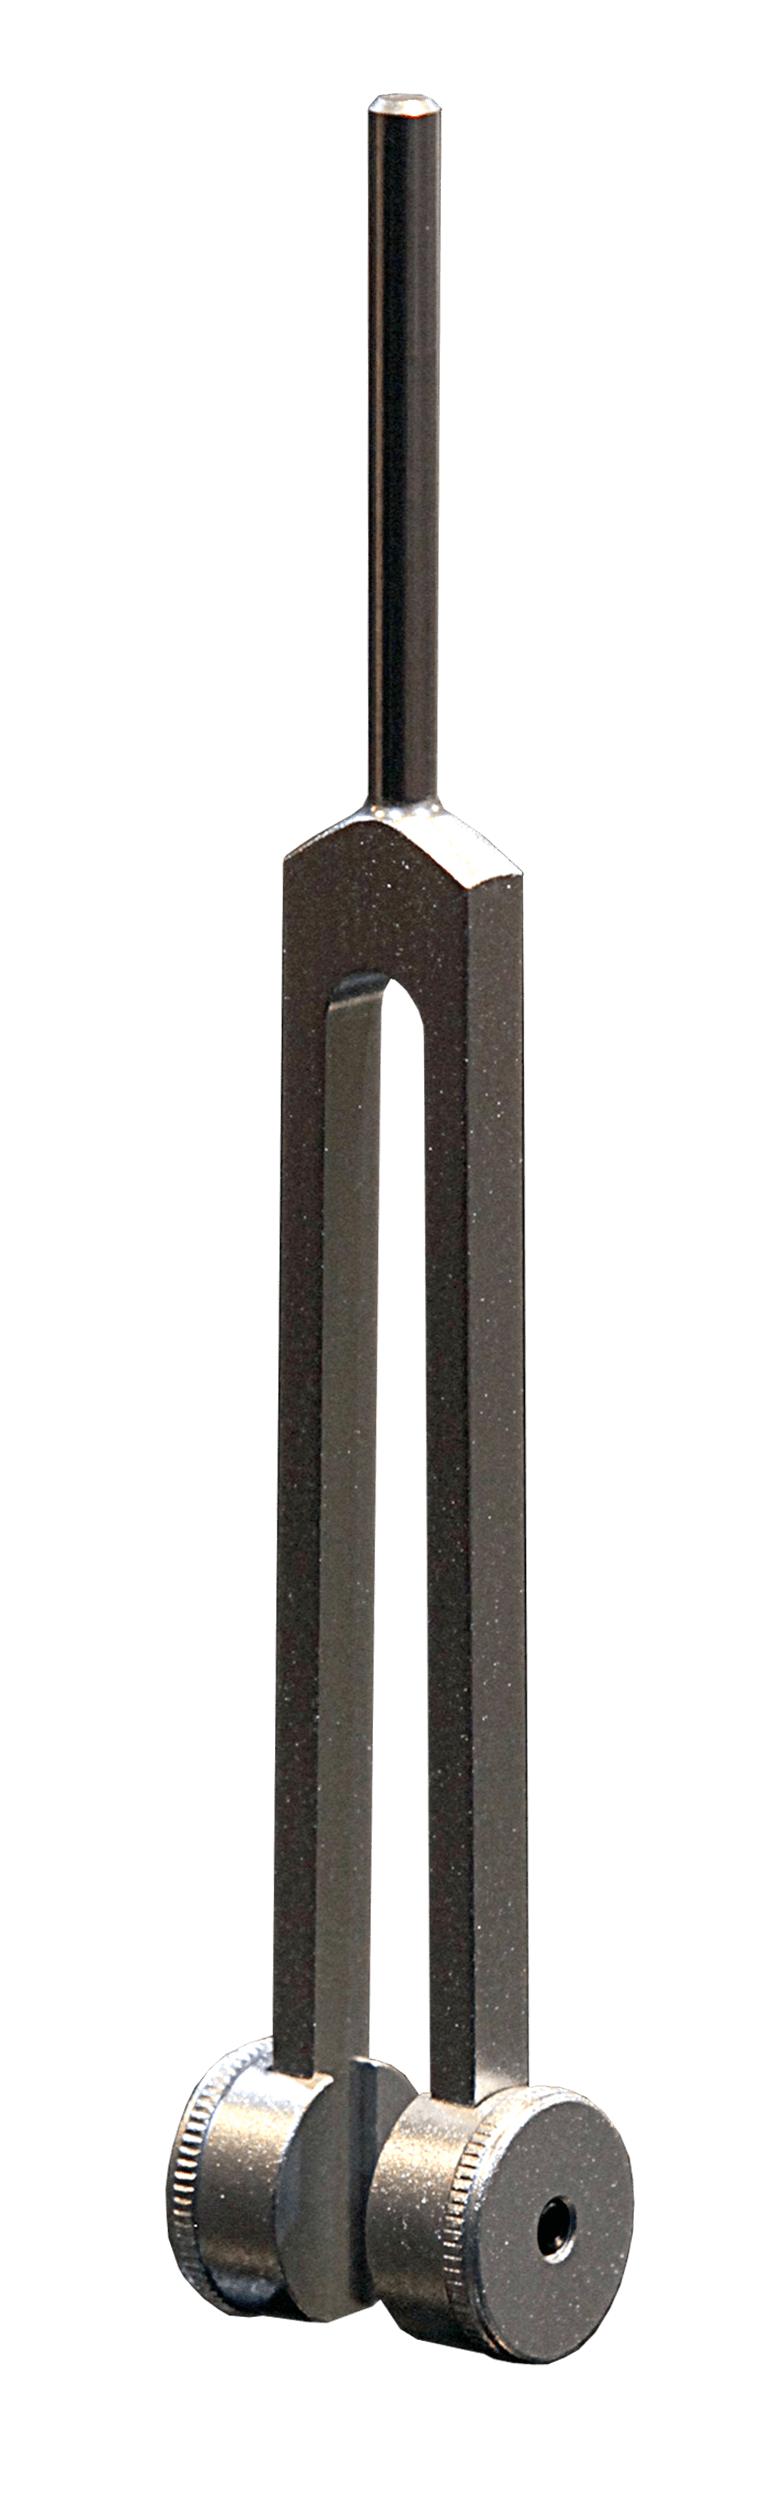 111 Hz Weighted Tuning Fork with Spread Tines